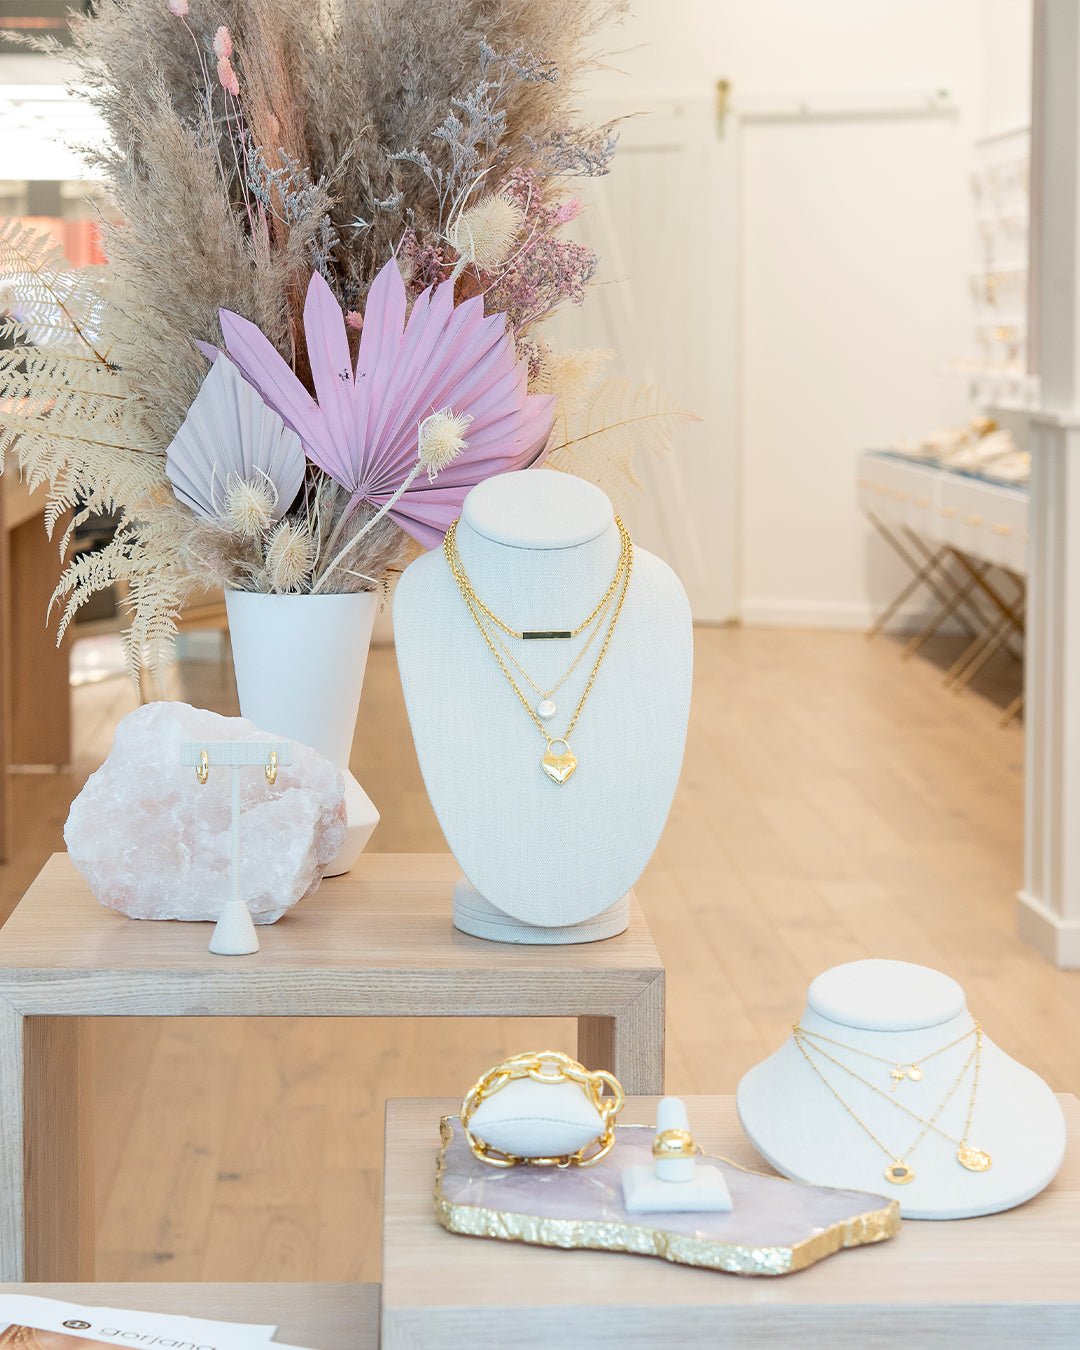 Jewelry stands with necklaces and earrings with a bouquet of boho flowers